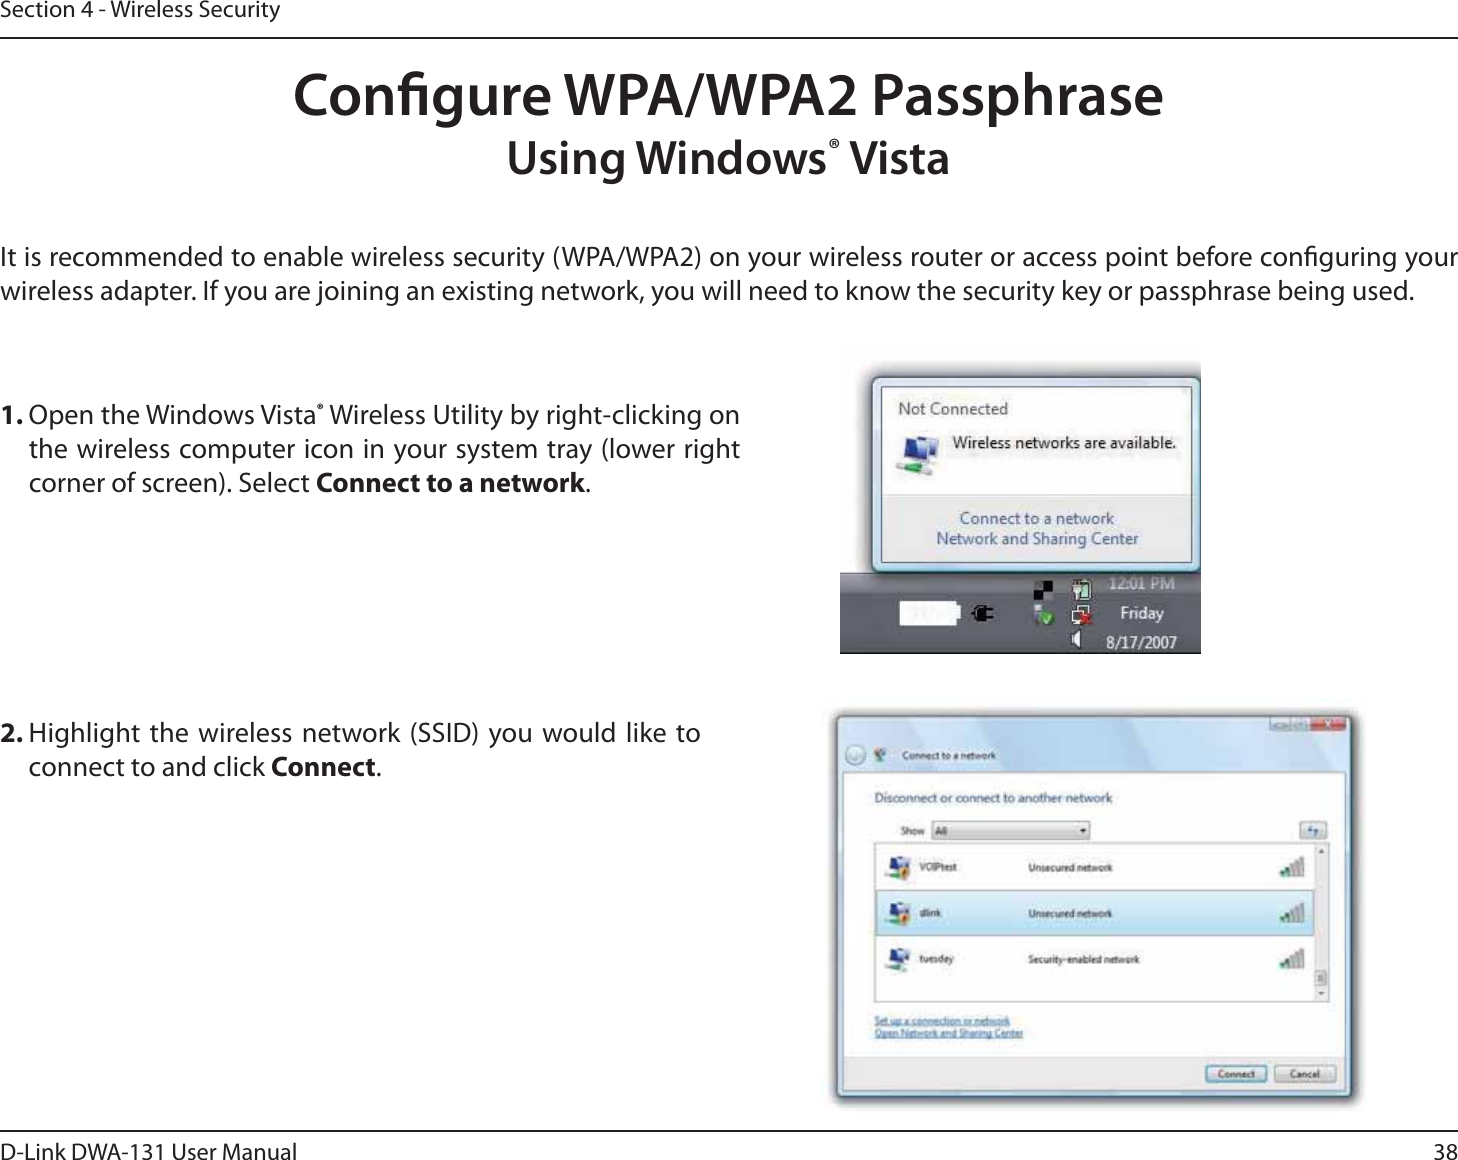 38D-Link DWA-131 User ManualSection 4 - Wireless SecurityCongure WPA/WPA2 PassphraseUsing Windows® VistaIt is recommended to enable wireless security (WPA/WPA2) on your wireless router or access point before conguring your wireless adapter. If you are joining an existing network, you will need to know the security key or passphrase being used.2. Highlight the wireless network (SSID) you would like to connect to and click Connect.1. Open the Windows Vista® Wireless Utility by right-clicking on the wireless computer icon in your system tray (lower right corner of screen). Select Connect to a network. 